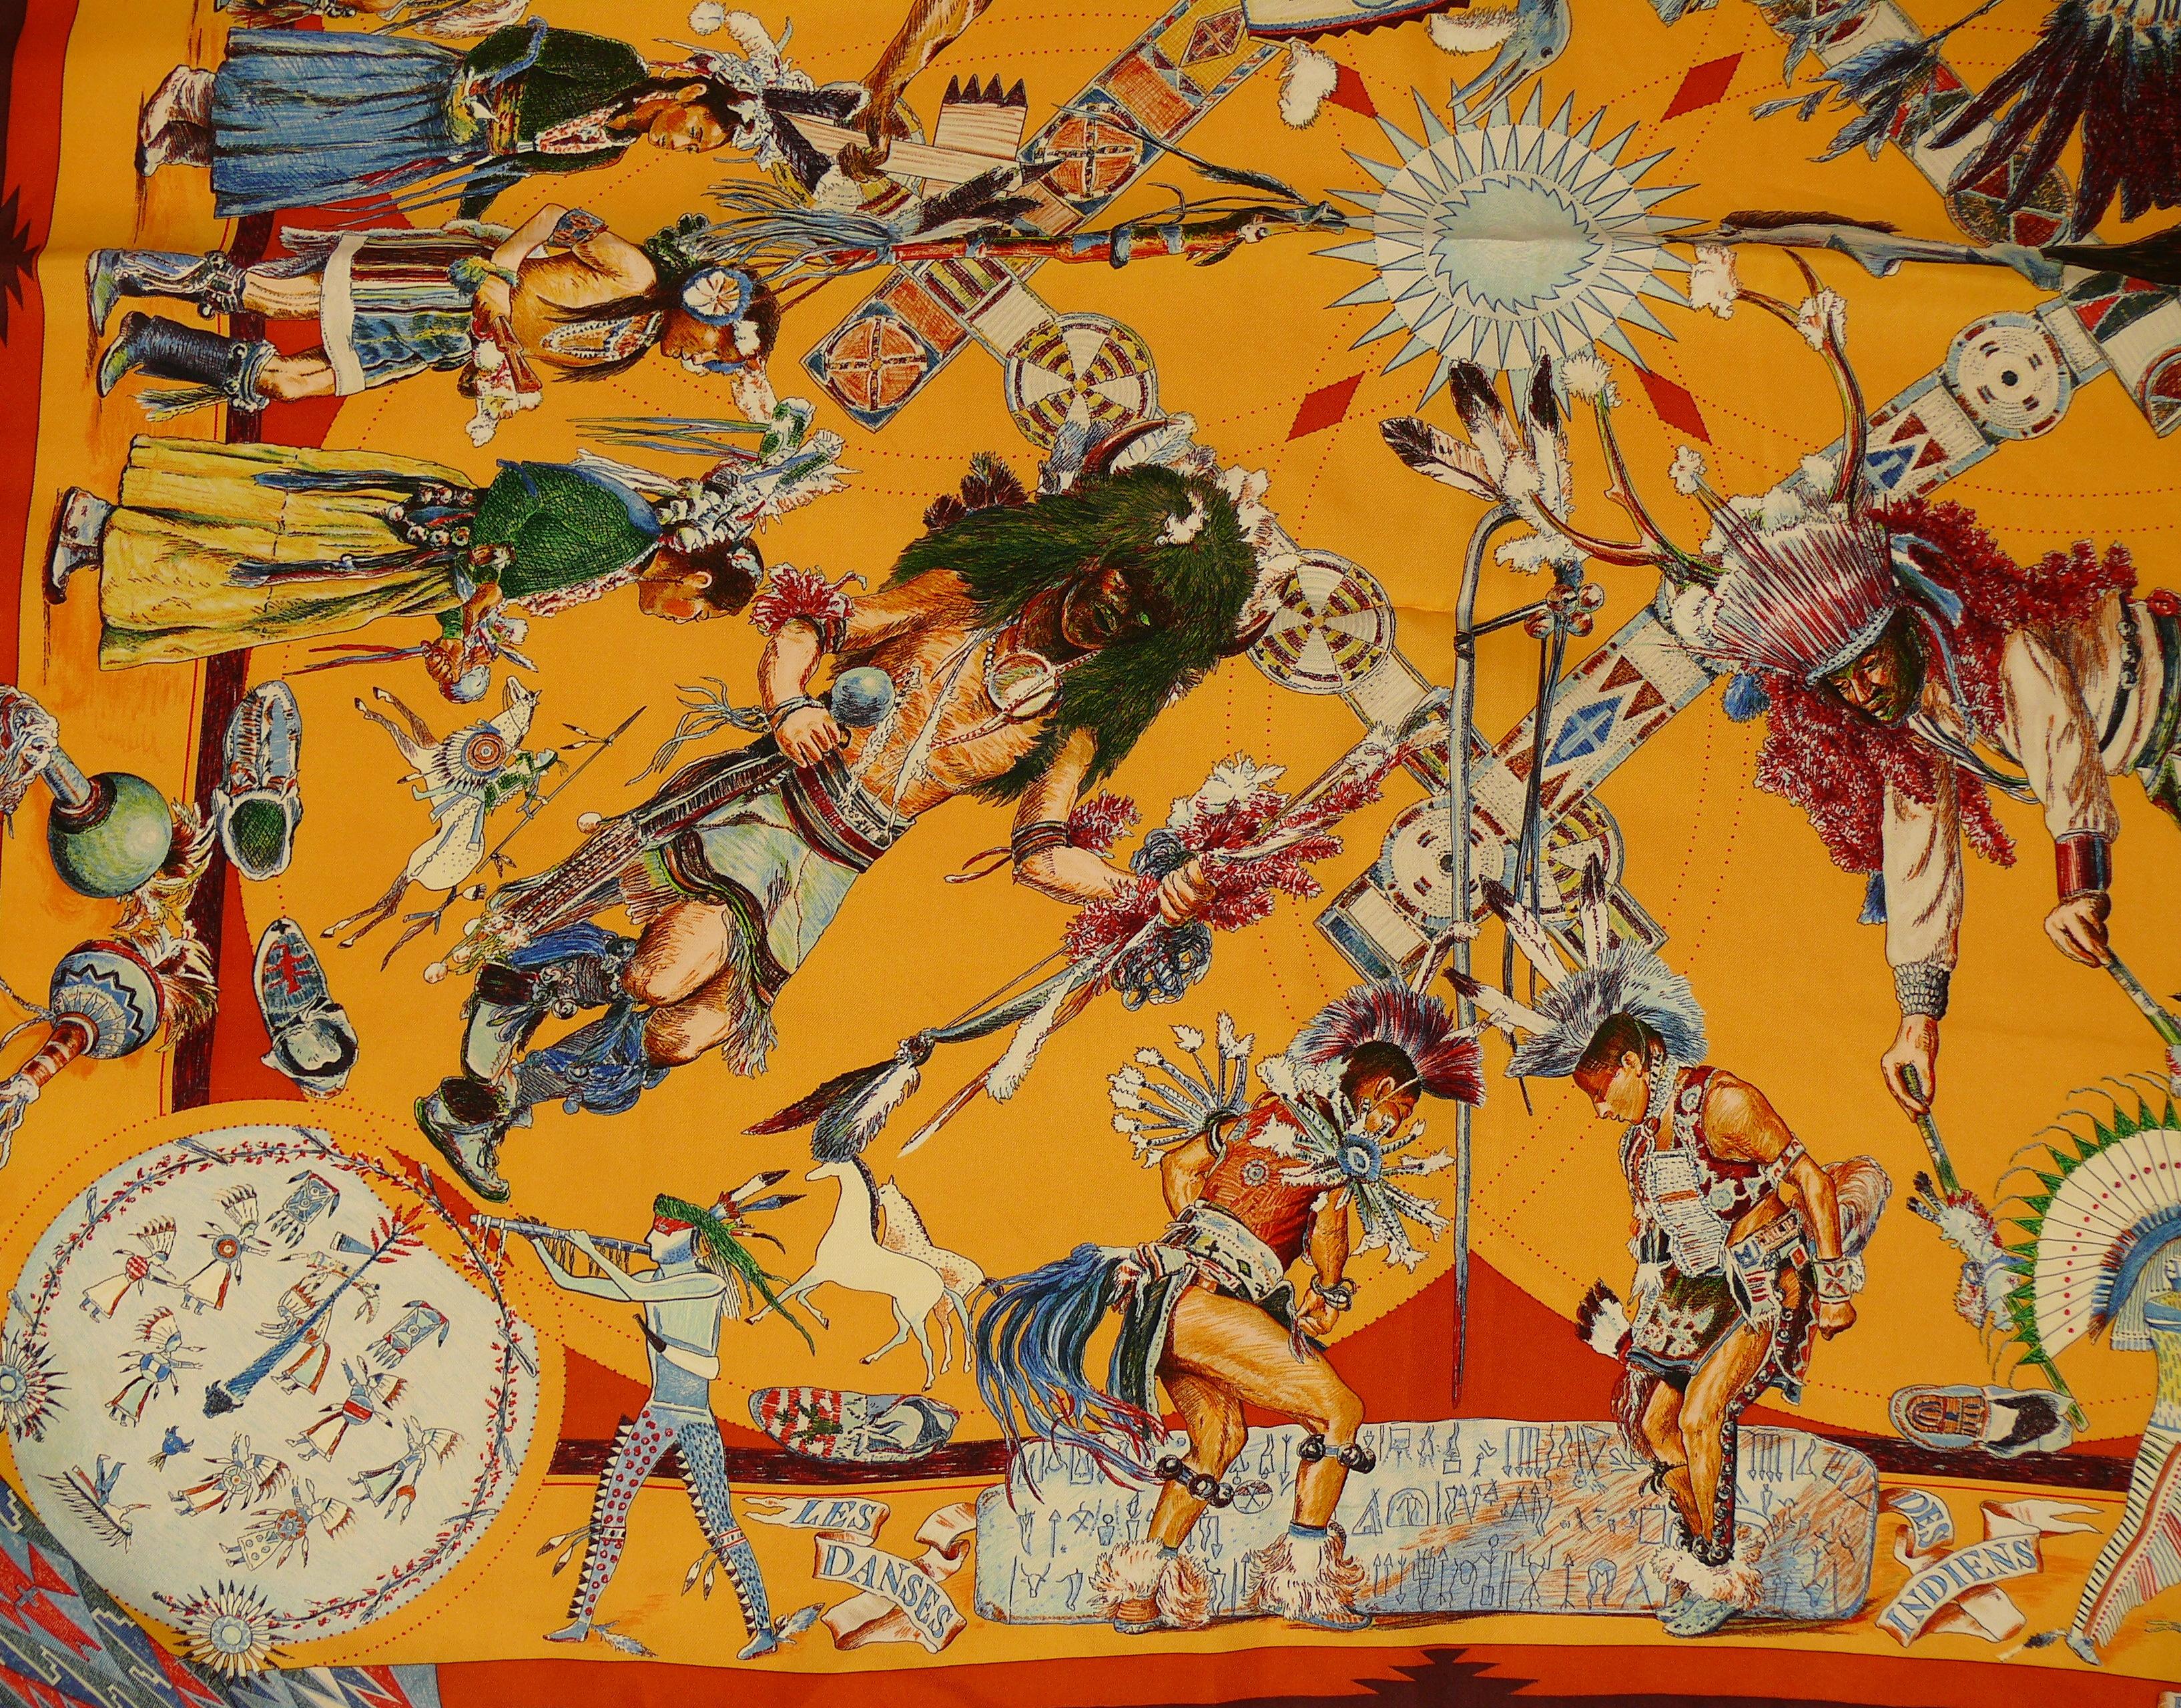 HERMES vintage highly sought after silk carre scarf LES DANSES DES INDIENS (THE DANCES OF THE NATIVE AMERICAN INDIANS) designed by native Texan KERMIT OLIVER.

This scarf design depicts Native American Indians dances as well as Native American art